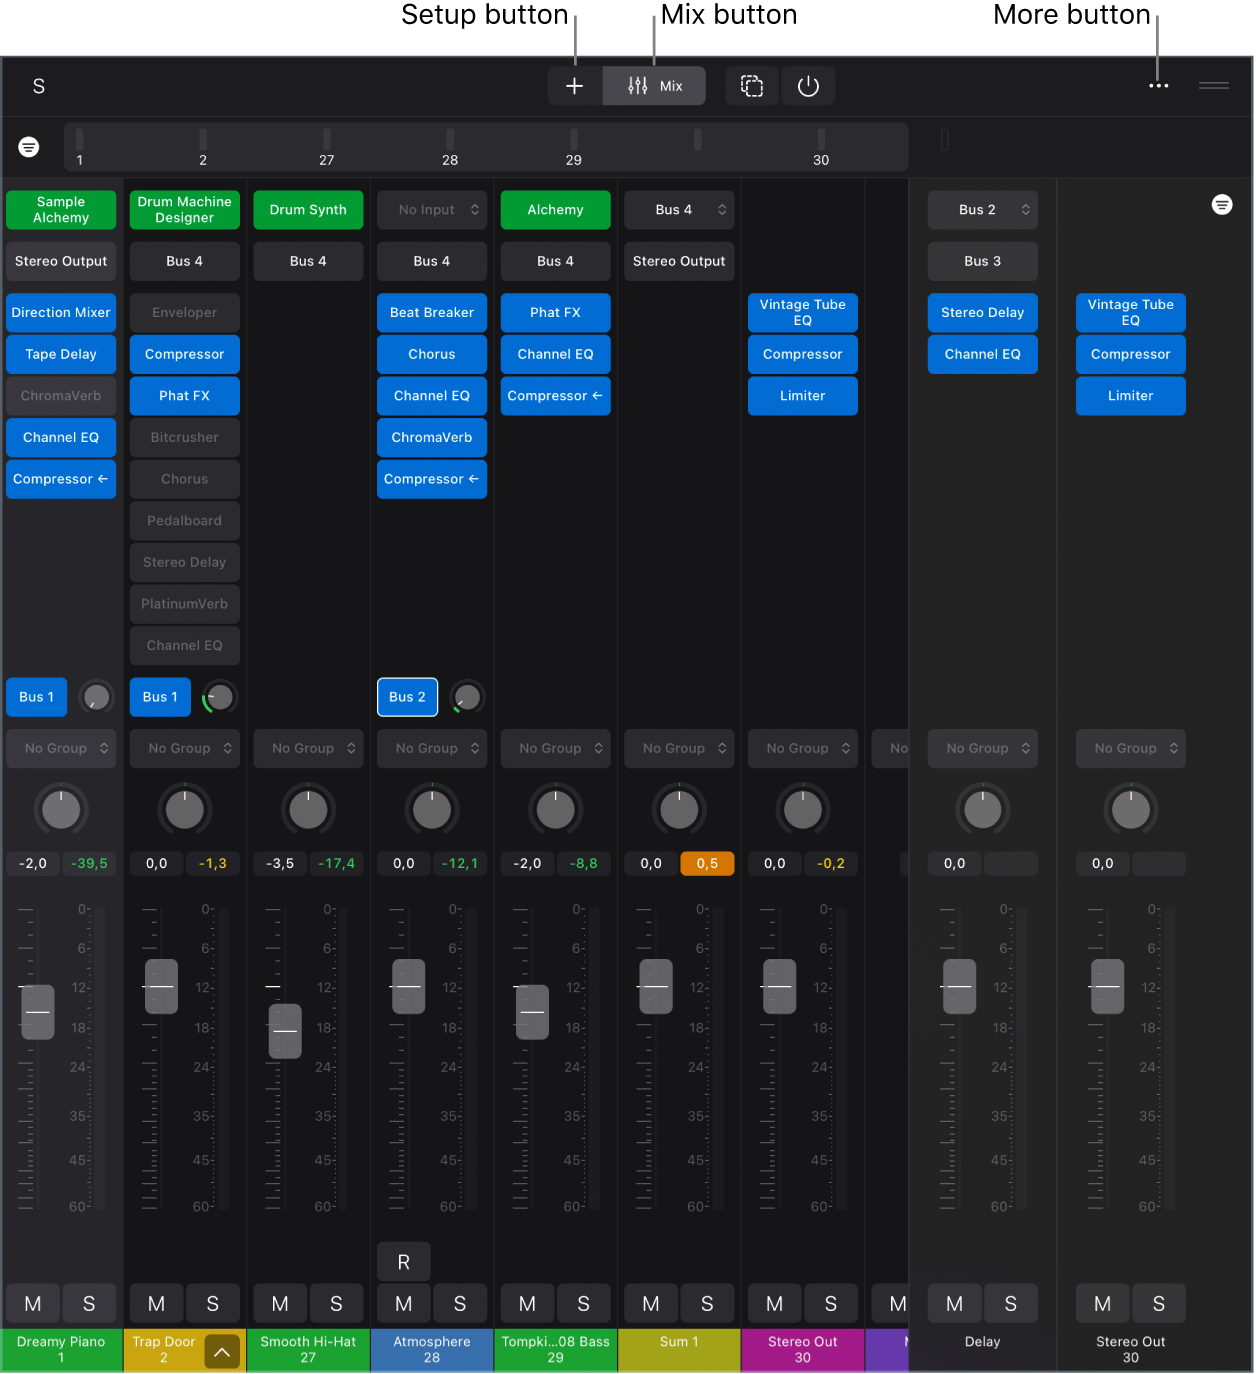 Figure. Mixer showing plug-in slots, channel strip controls, callouts for Setup and Mix buttons.